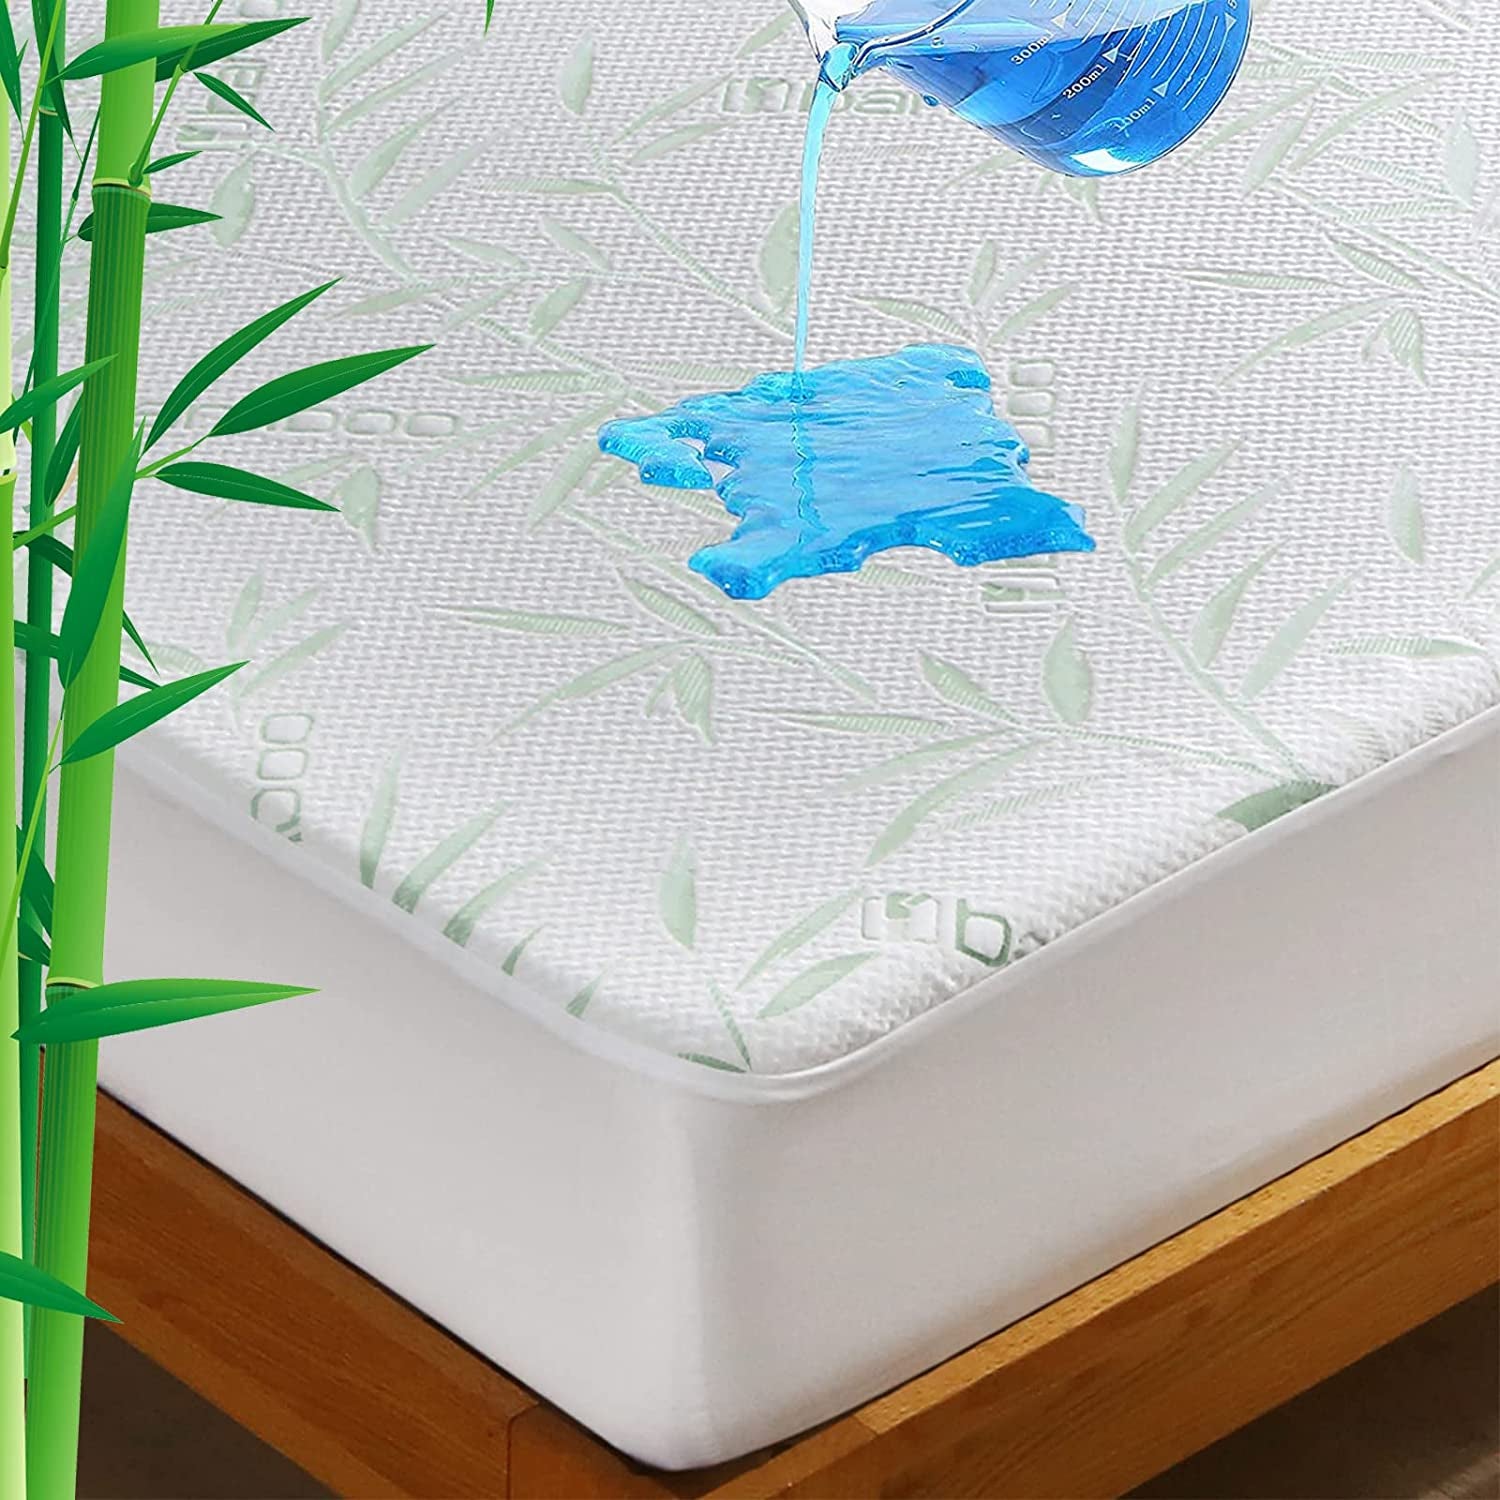 Queen Size Quilted Fitted Mattress Pad, Waterproof Breathable Cooling Mattress Protector, Stretches up to 21 Inches Deep Pocket Hollow Cotton Alternative Filling Noiseless Mattress Cover